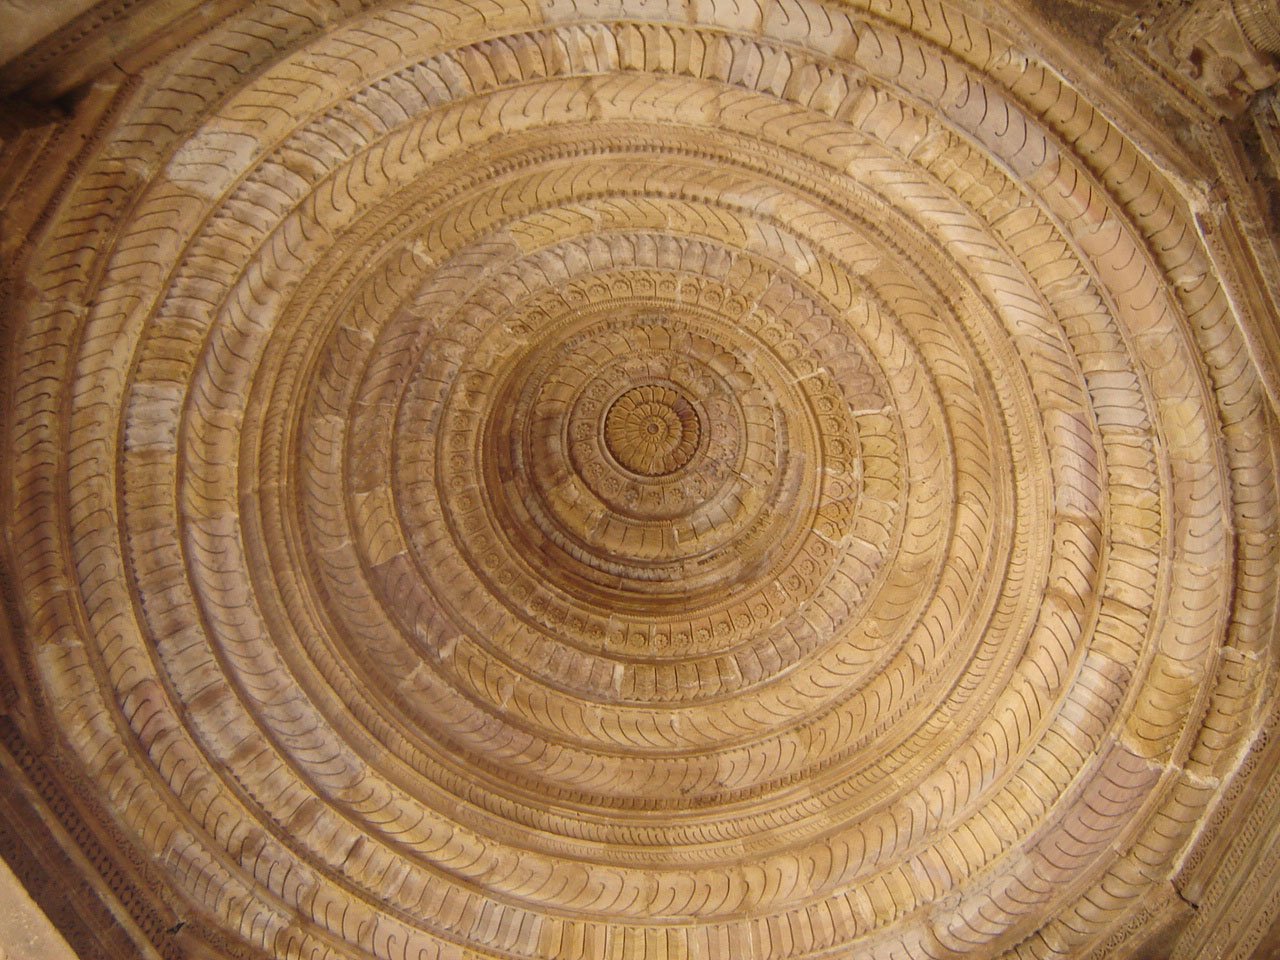 a close up s of the inside of a tree